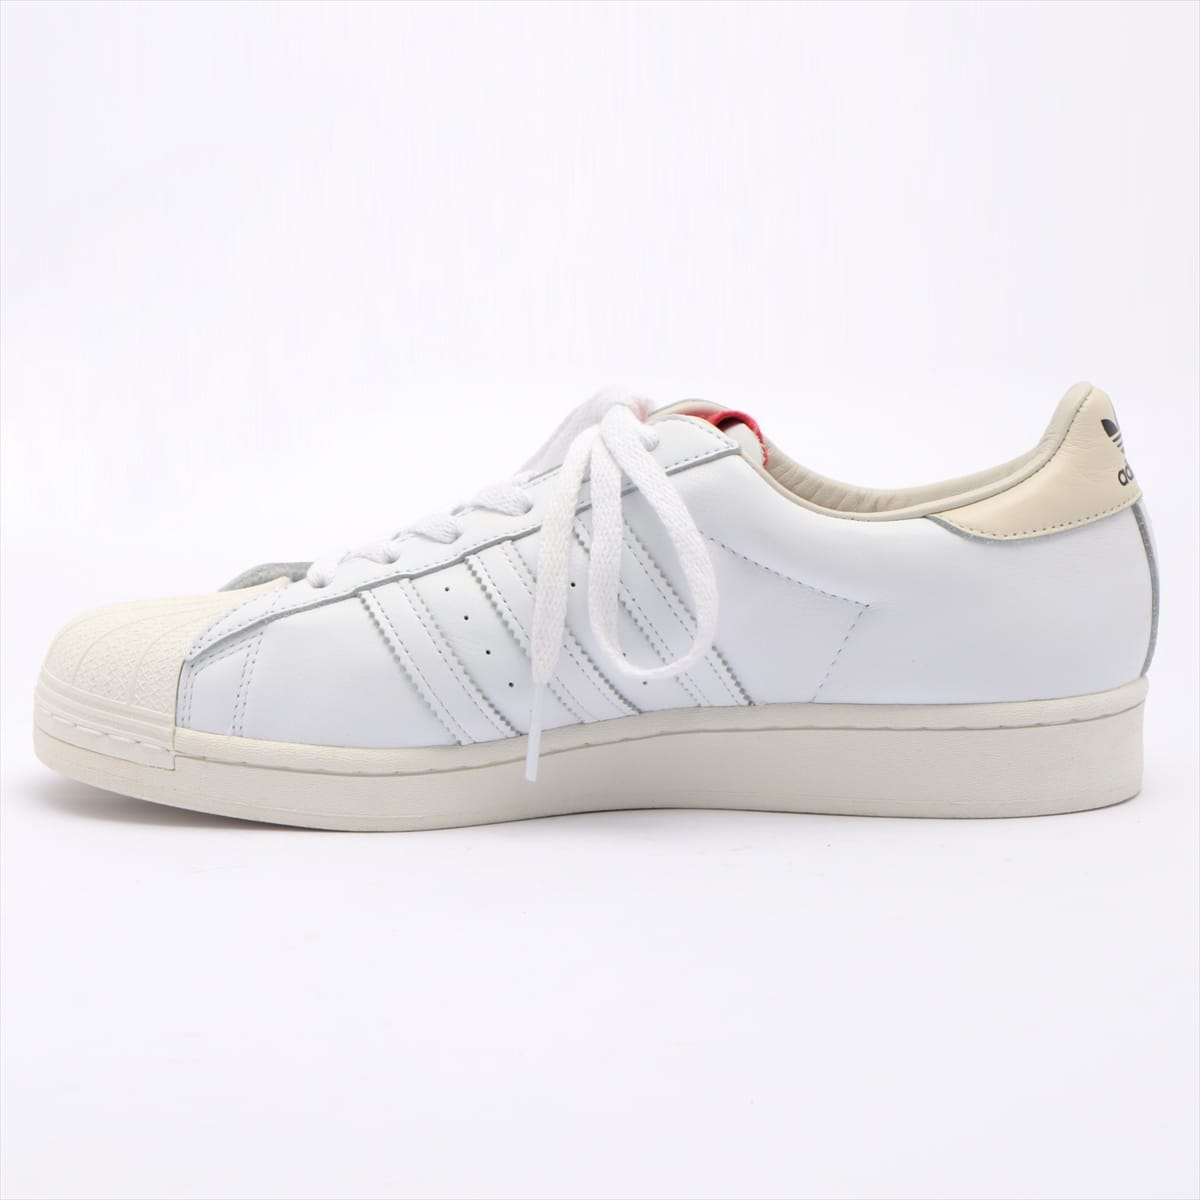 Adidas superstars Leather Sneakers 28.5cm Men's White 424 collaboration SHELL TOE